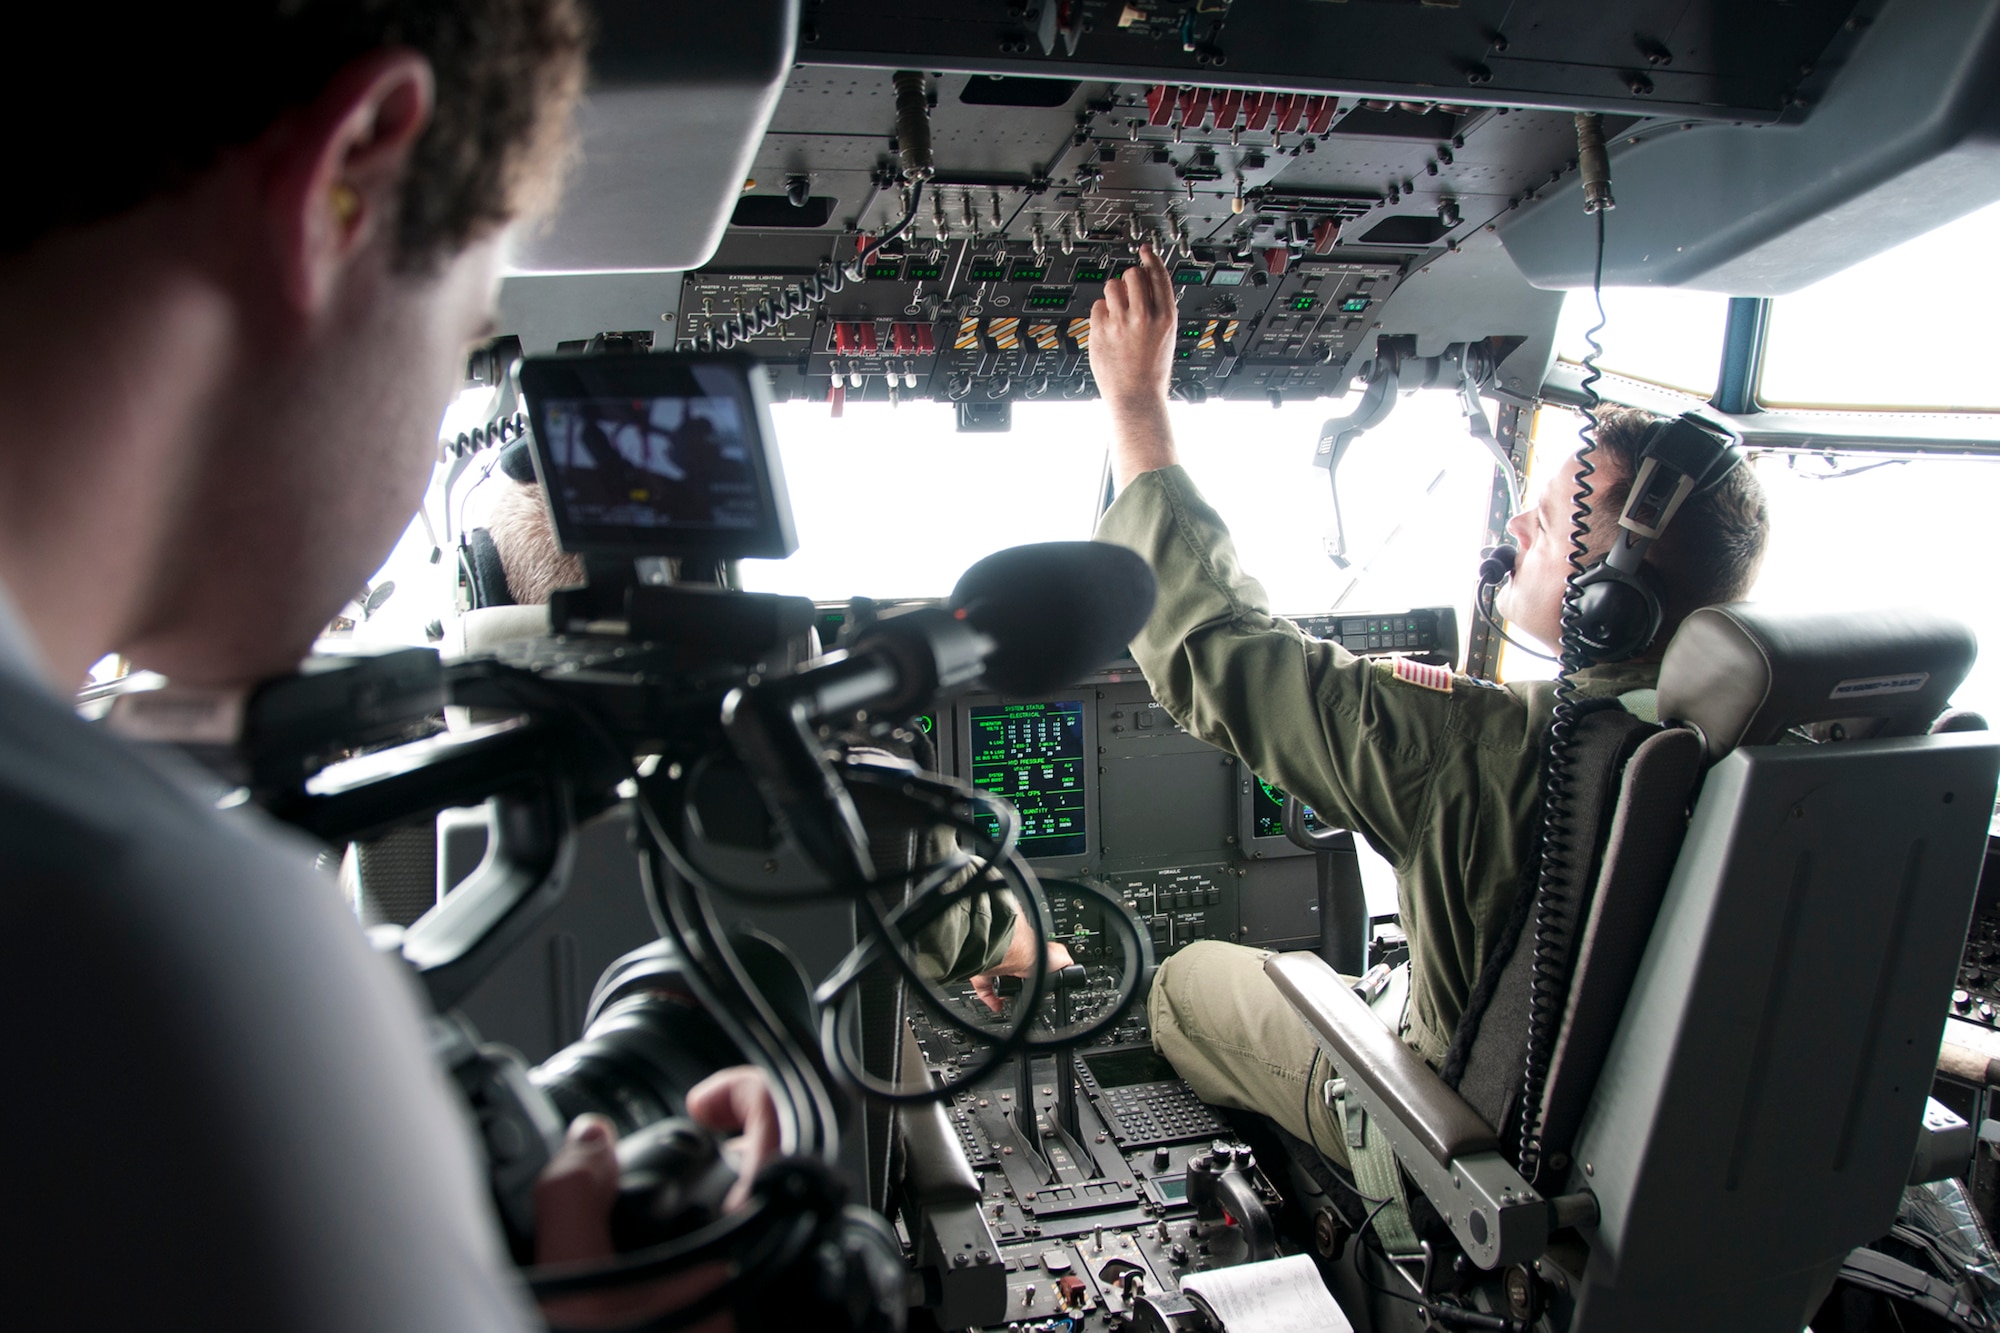 Thom Patterson, CNN videographer (left), uses a camera to capture footage of 53d Weather Reconnaissance Squadron “Hurricane Hunter” pilots inside the cockpit of a C-130 Hercules during a flight over Maryland June 28, 2016. As part of the 100th anniversary of air power in the U.S. military, members of the media were invited to fly with the Hurricane Hunters and learn about their weather surveillance mission. With ten deployable C-130s, the unit has the only routine aerial weather reconnaissance mission in the world. (U.S. Air Force photo/Staff Sgt. Kat Justen)